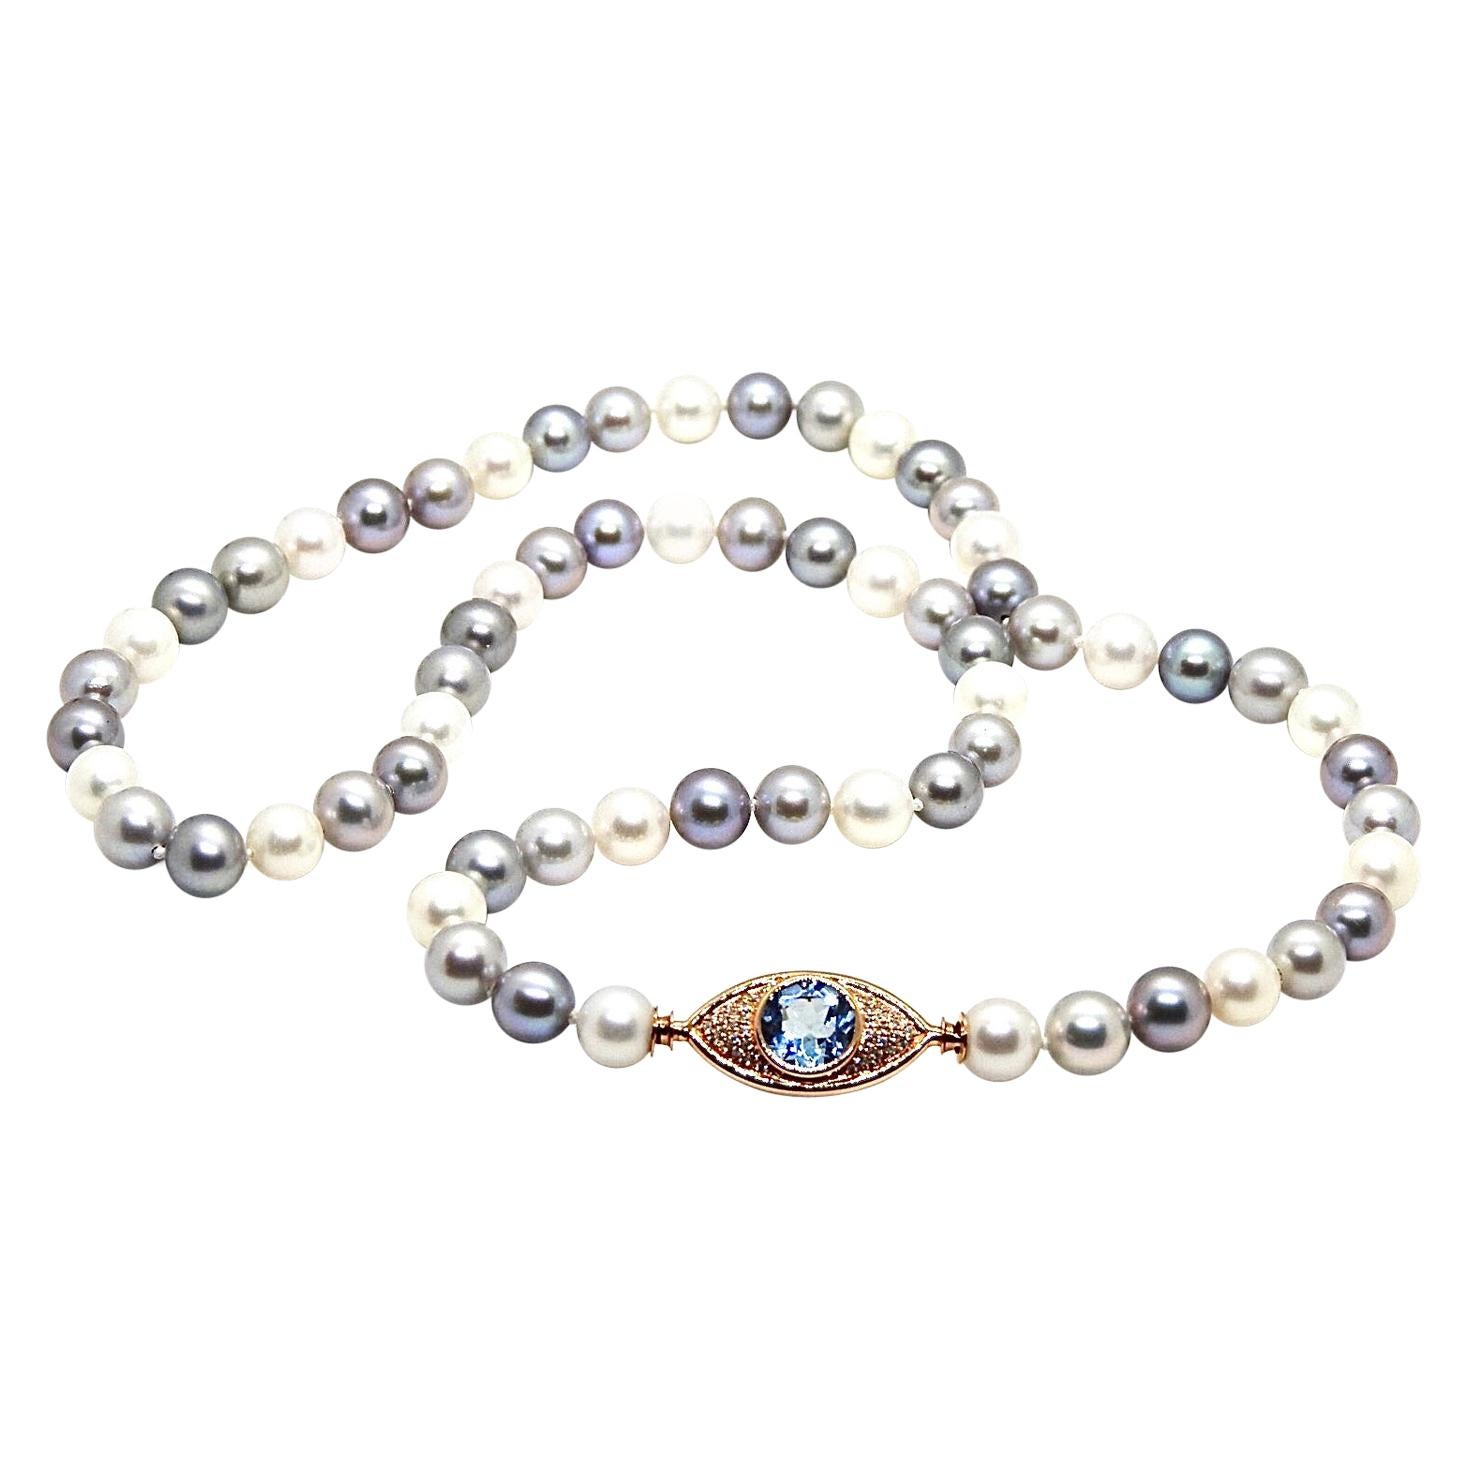 Pearls Necklace with 18 Karat Gold, Diamonds and Sky Blue Topaz Eye Clasp For Sale